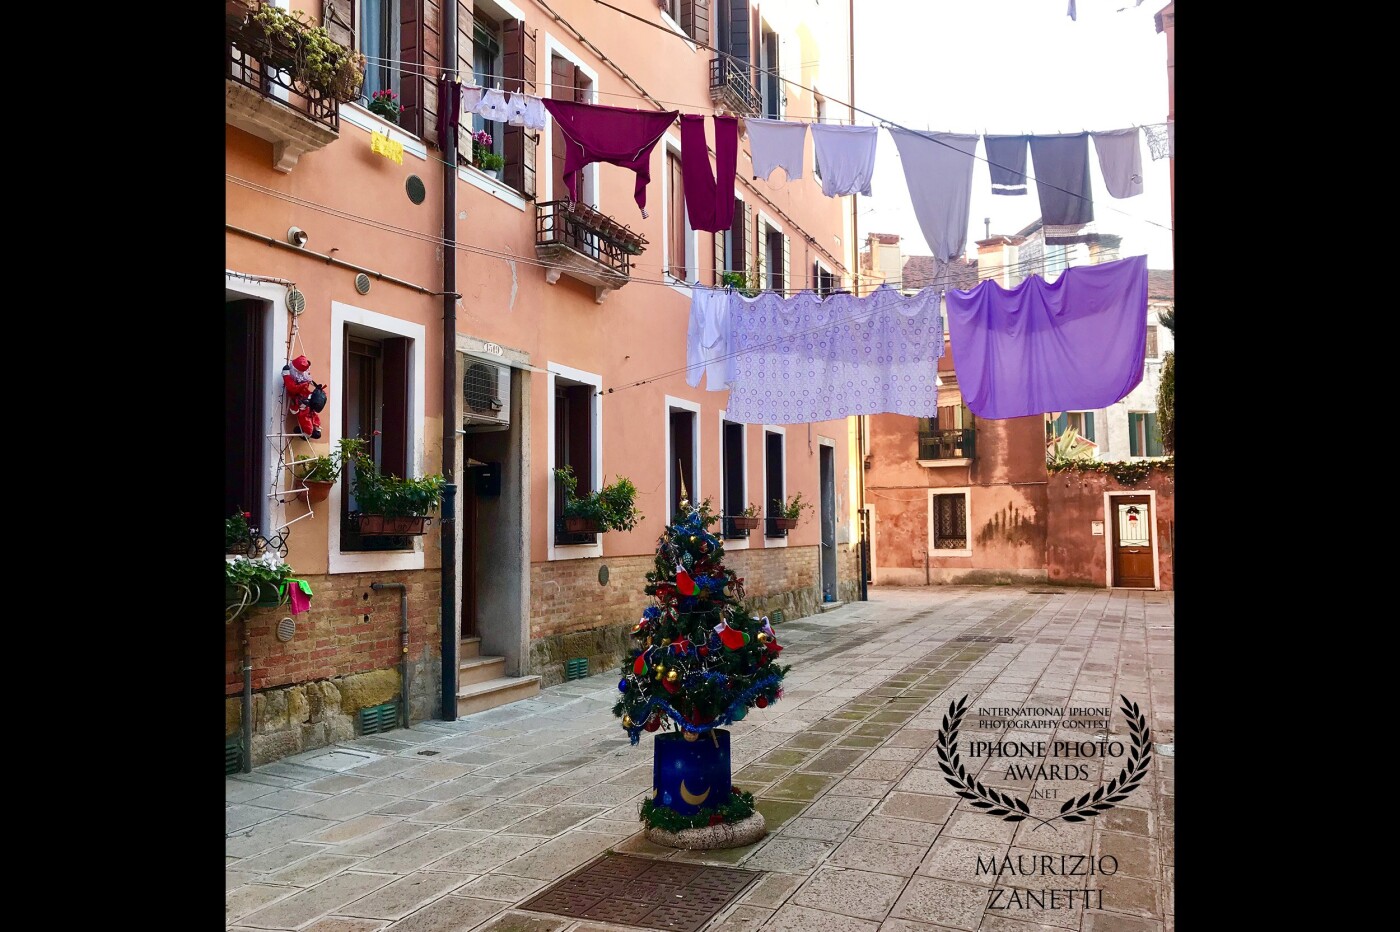 Christmas in Venice means being able to find a shared Christmas tree in a small square in the Castello district, far from the tourist flow. The photo dates back to the end of December 2018. A memory that the current pandemic makes even clearer. A wish that everything can be as before as soon as possible.